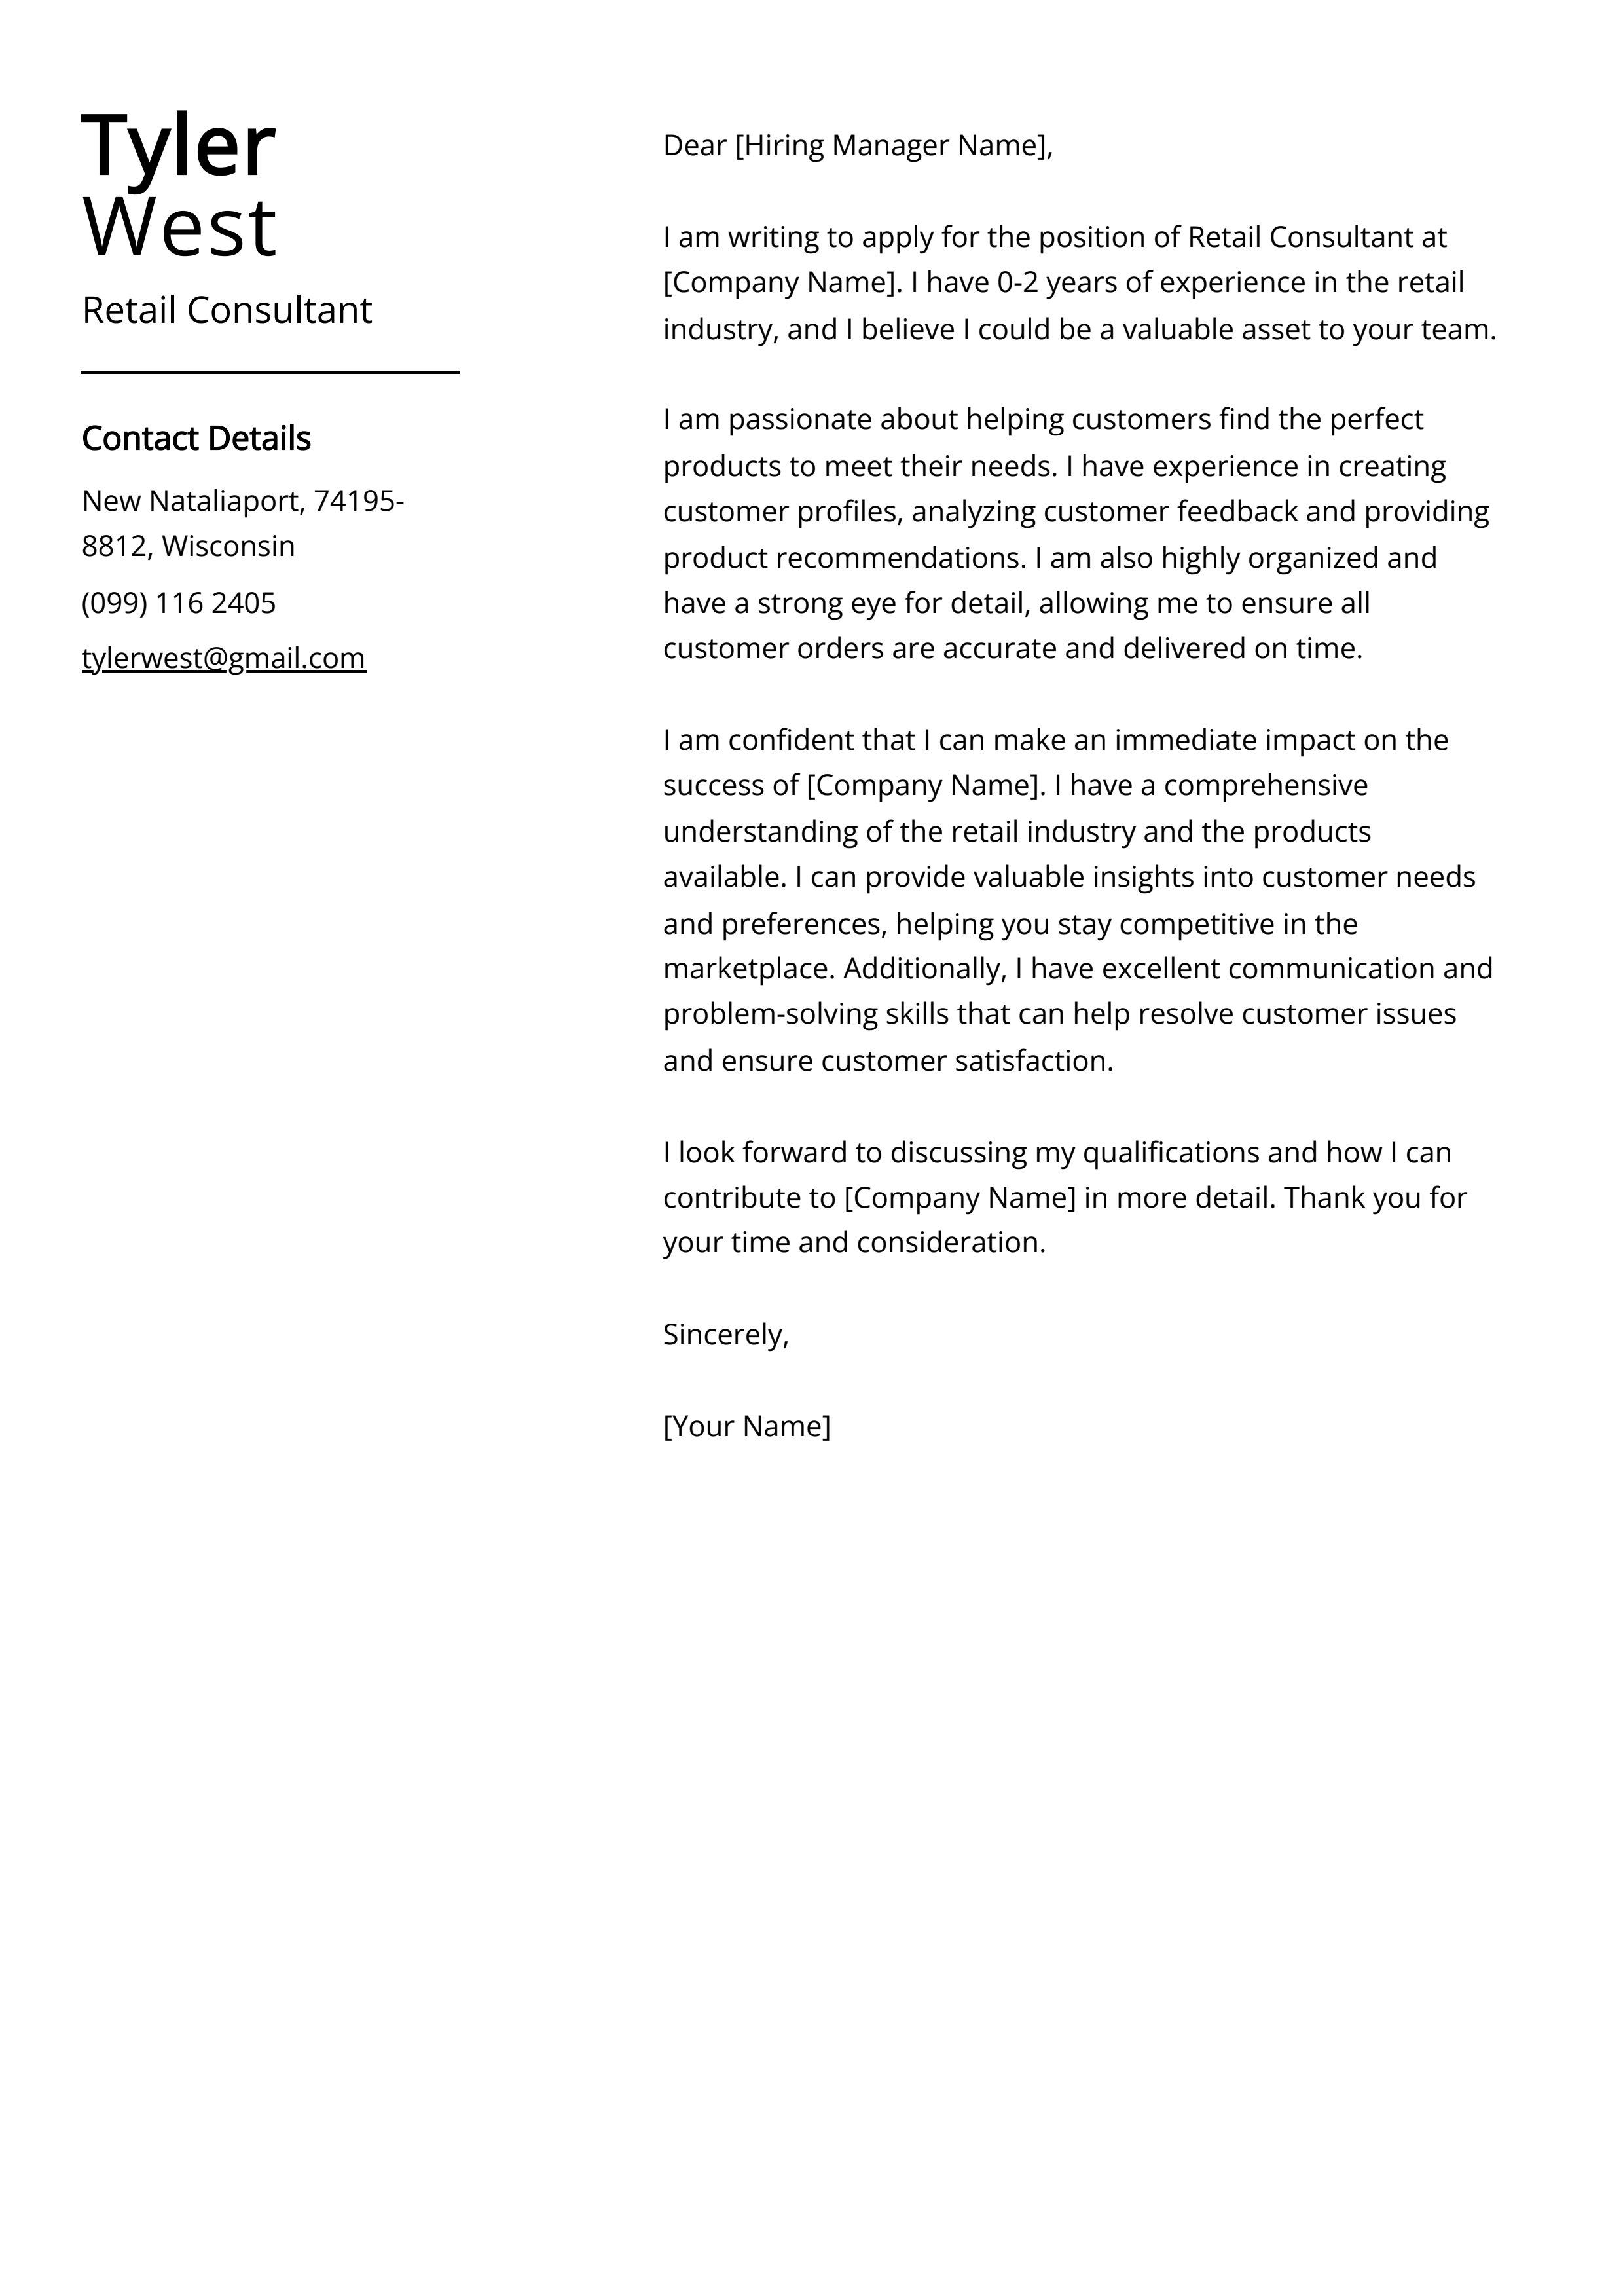 Retail Consultant Cover Letter Example